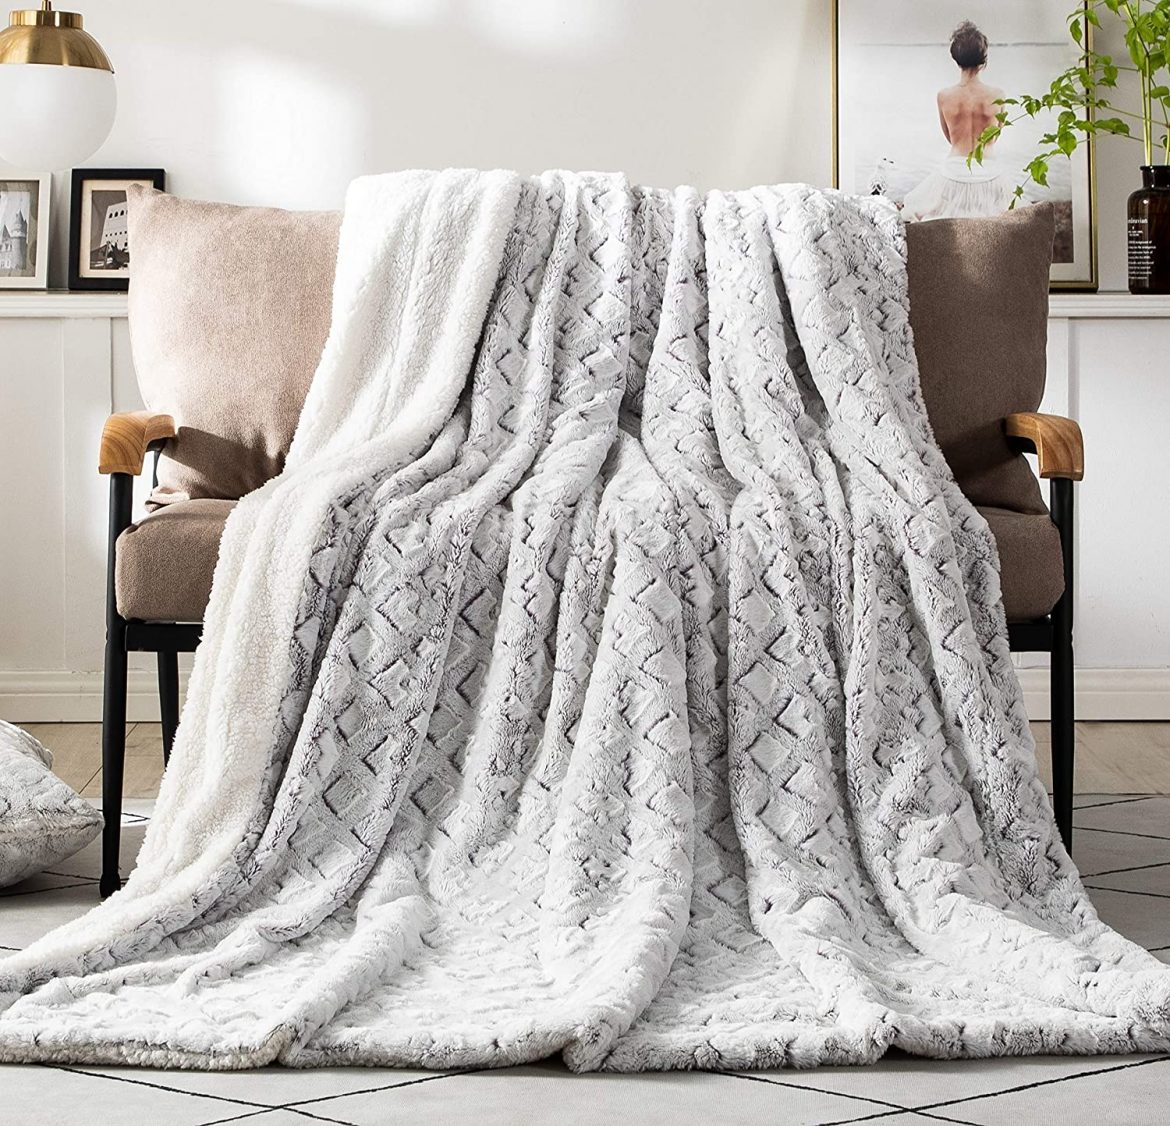 Top 10 Best Softest Blankets in the World in 2023 Reviews